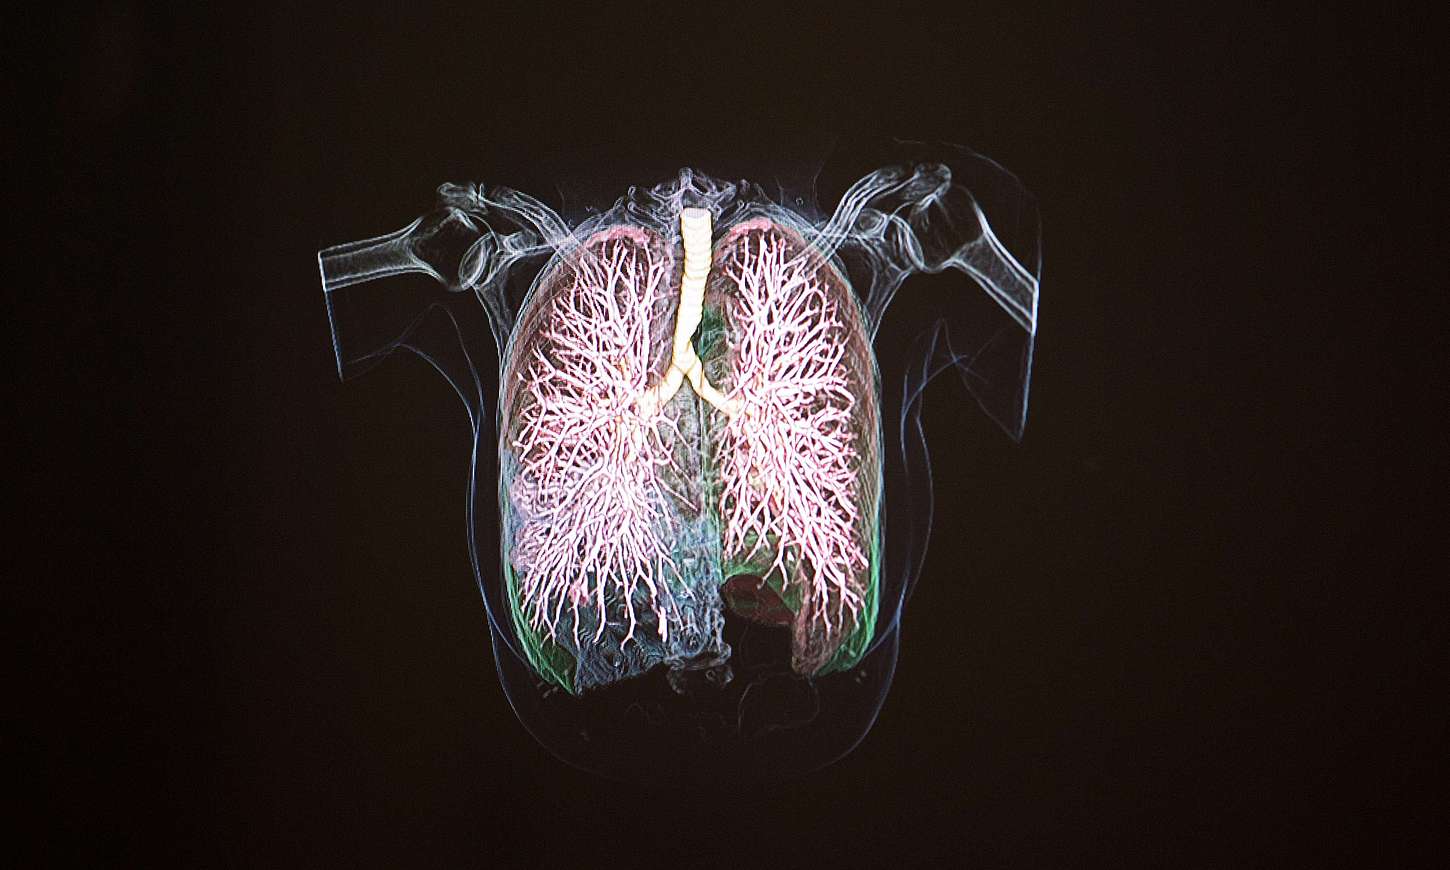 3D visualization of the lung.